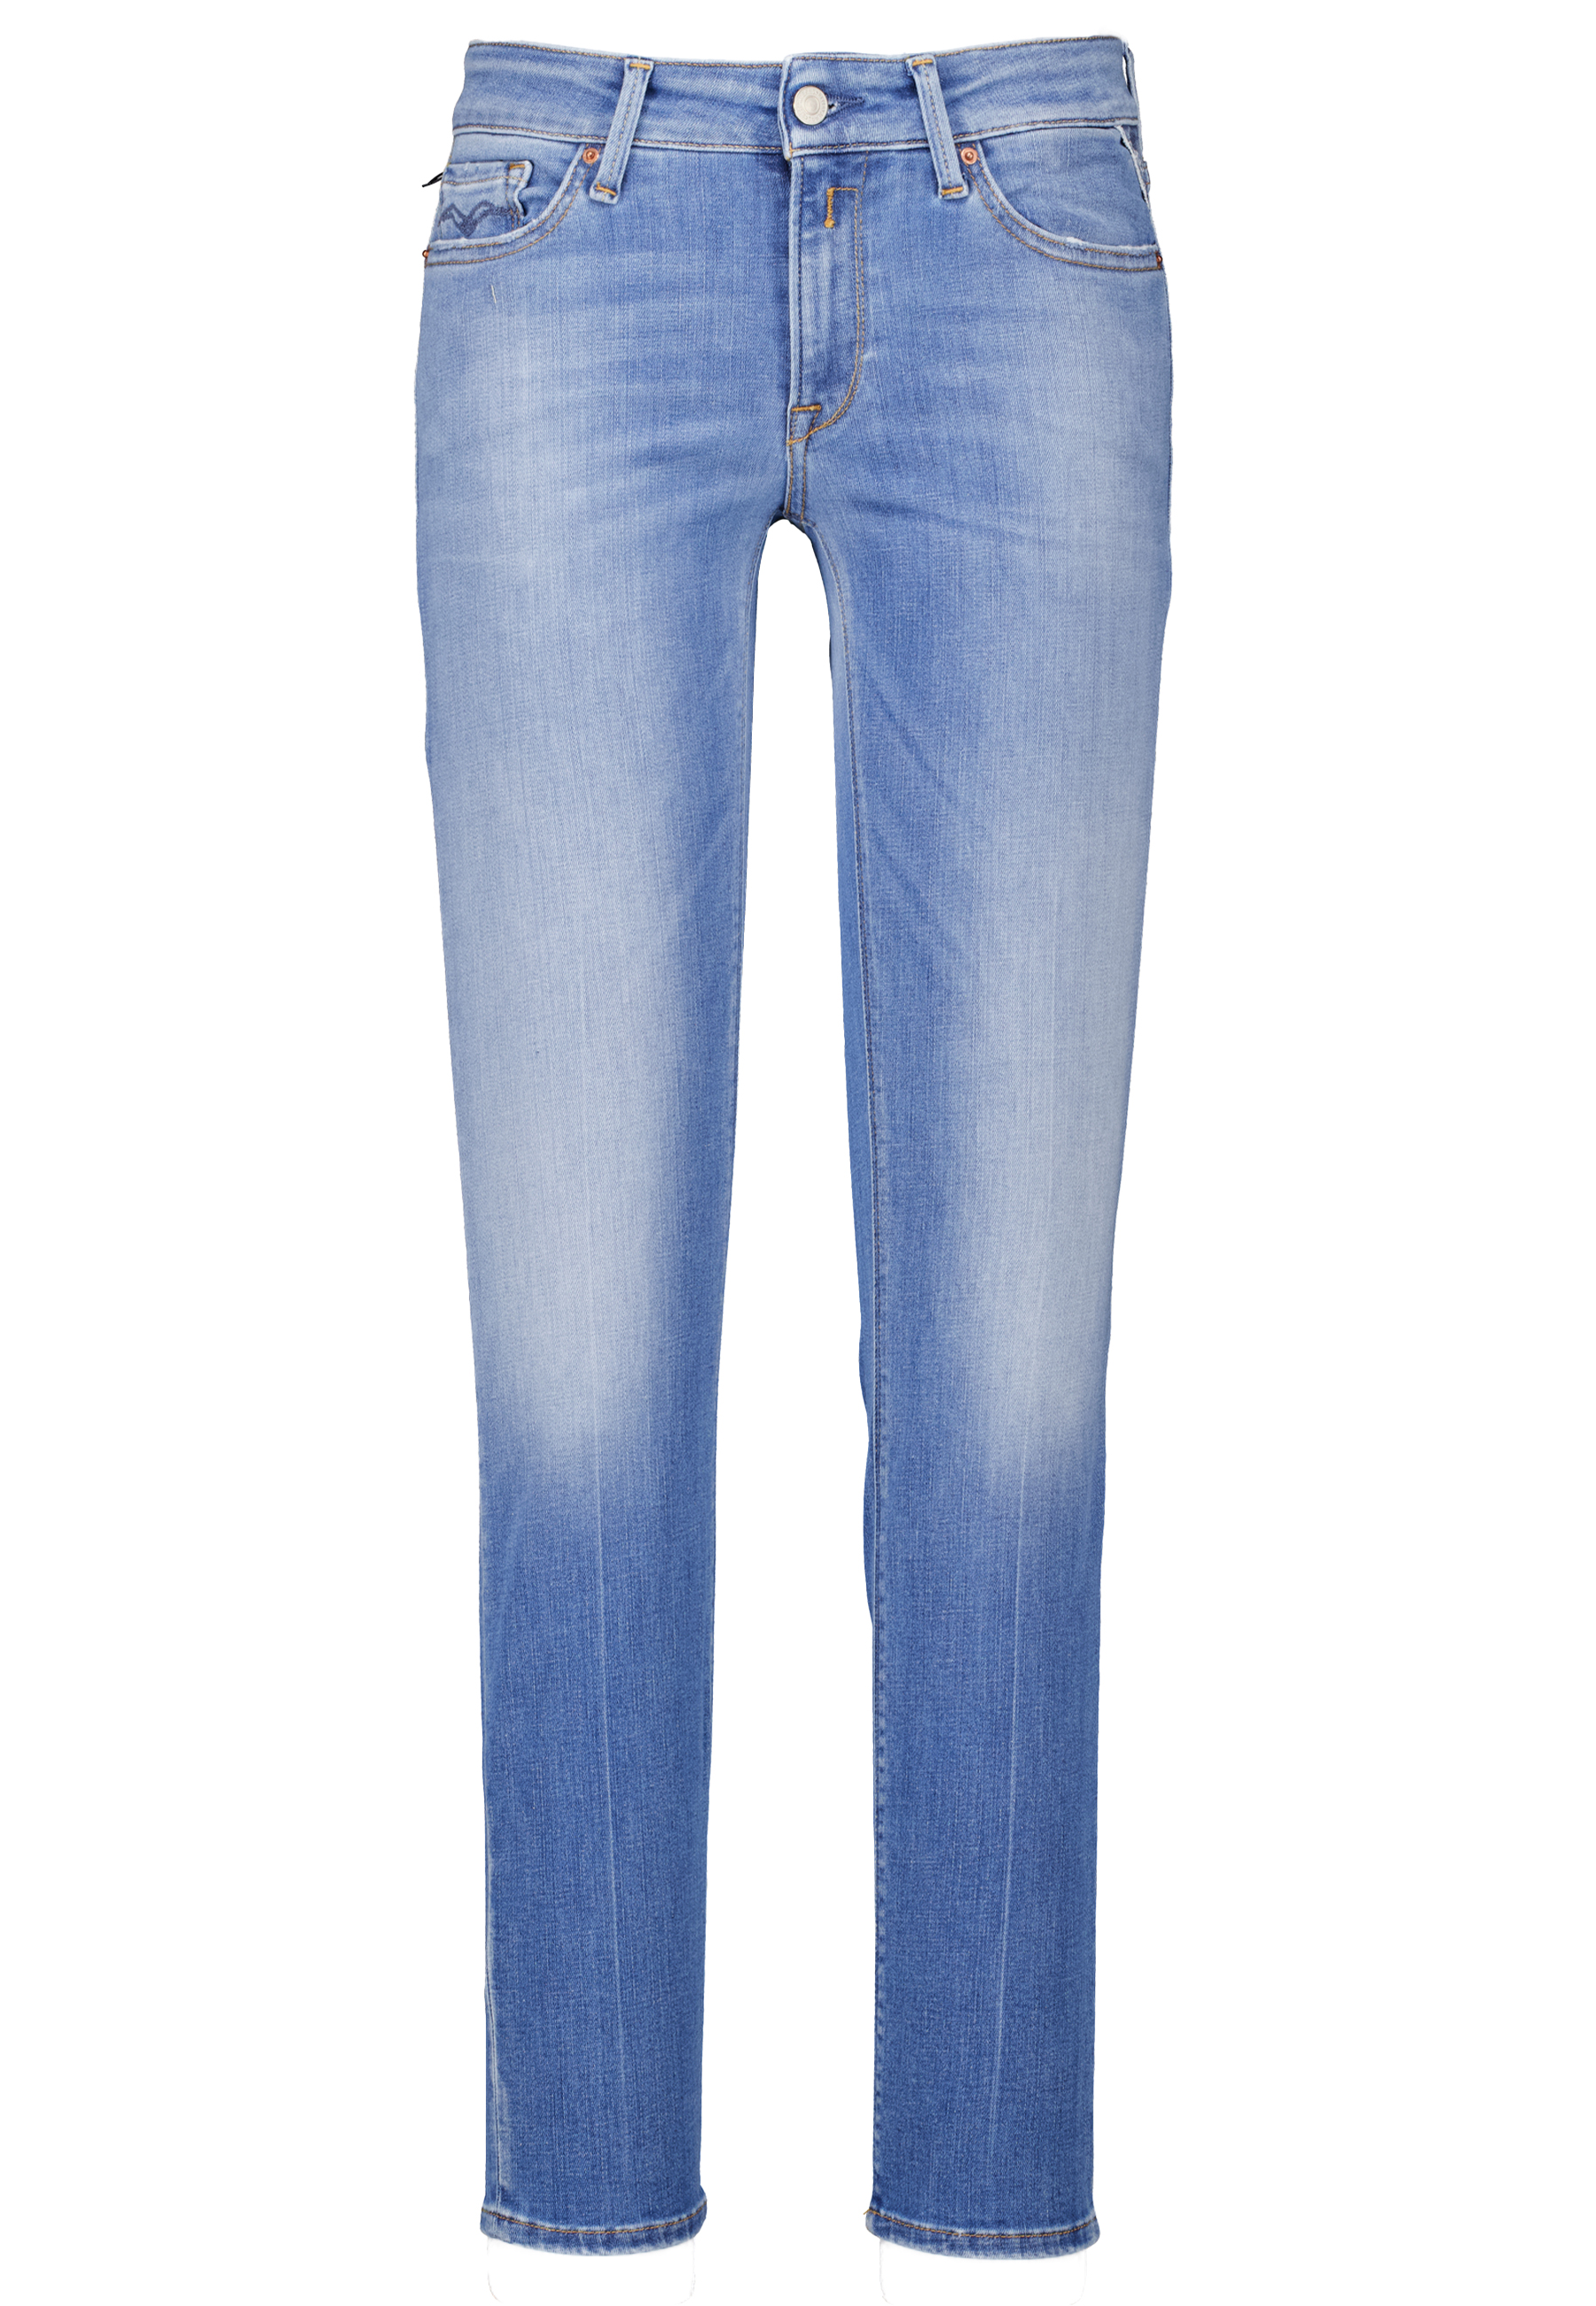 Replay jeans jeans Dames maat 25/30